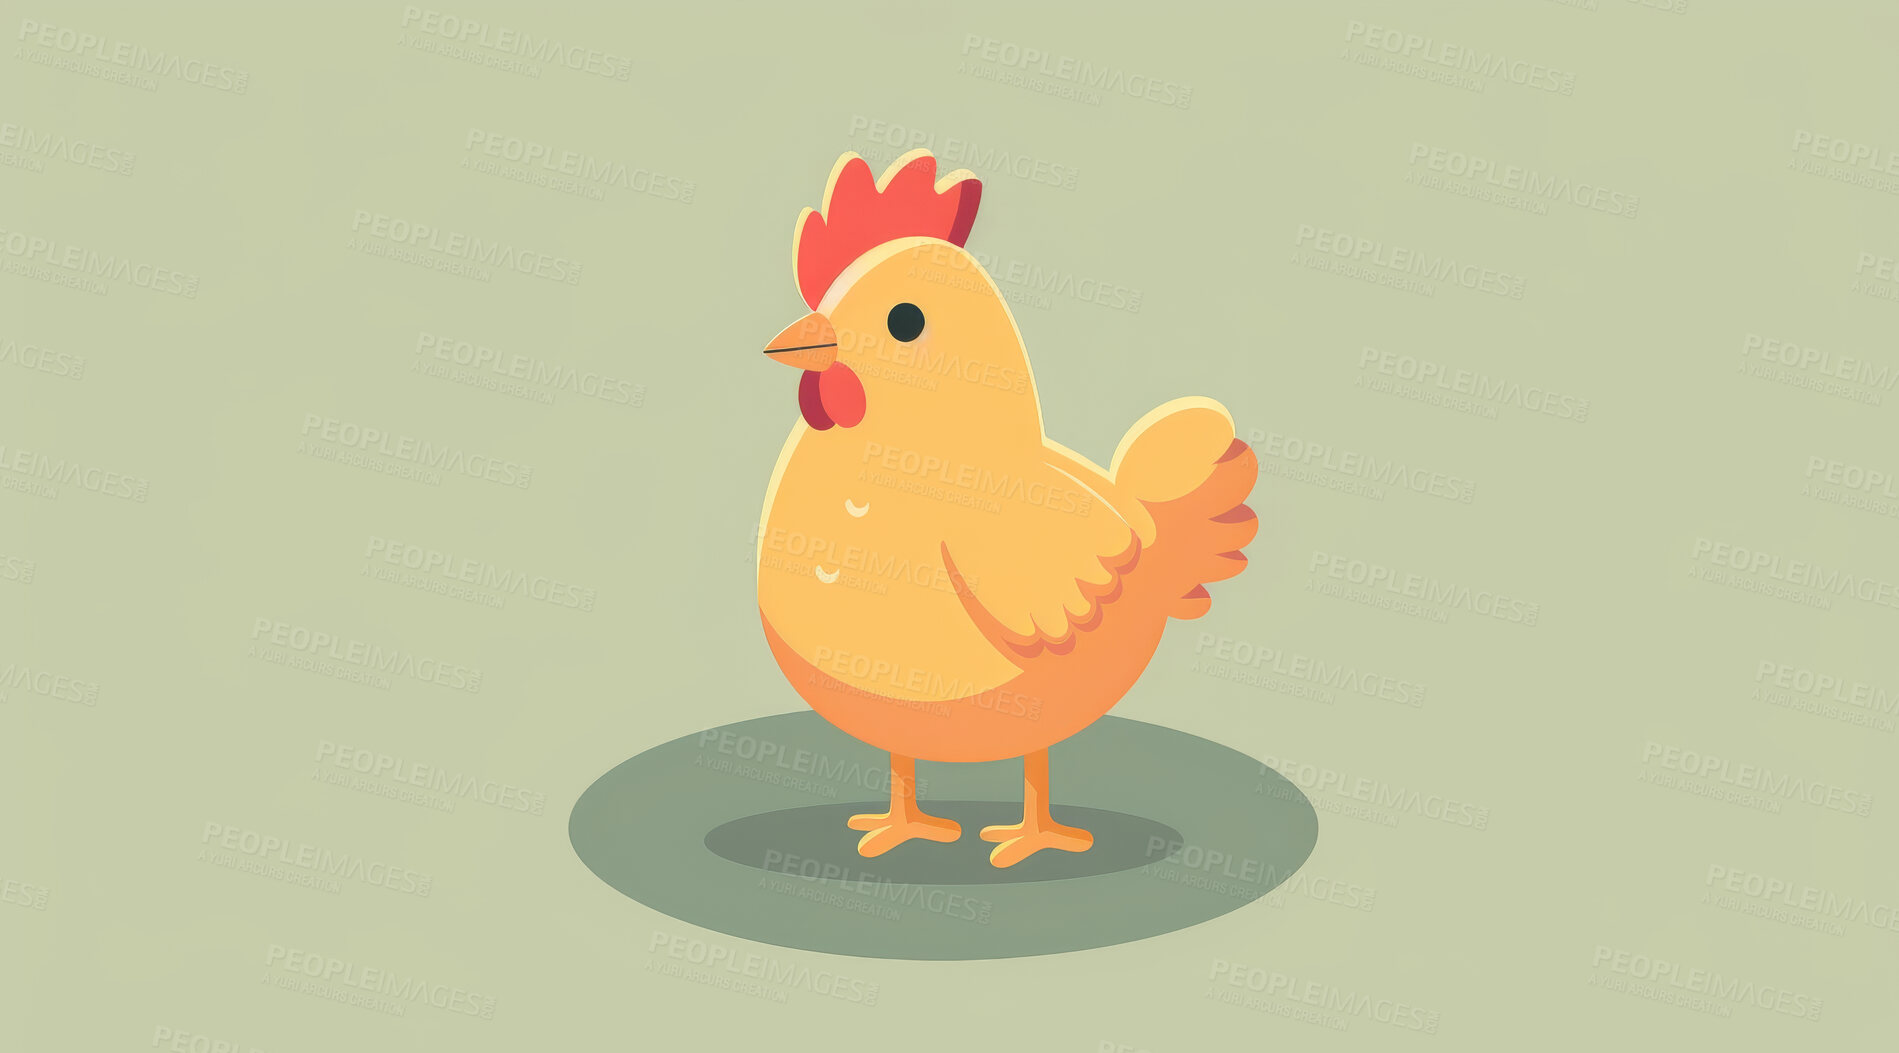 Buy stock photo Chicken, illustration and digital art of an animal isolated on a background for poster, post card or printing. Cute, creative and drawing of a cartoon character for wallpaper, canvas and decoration